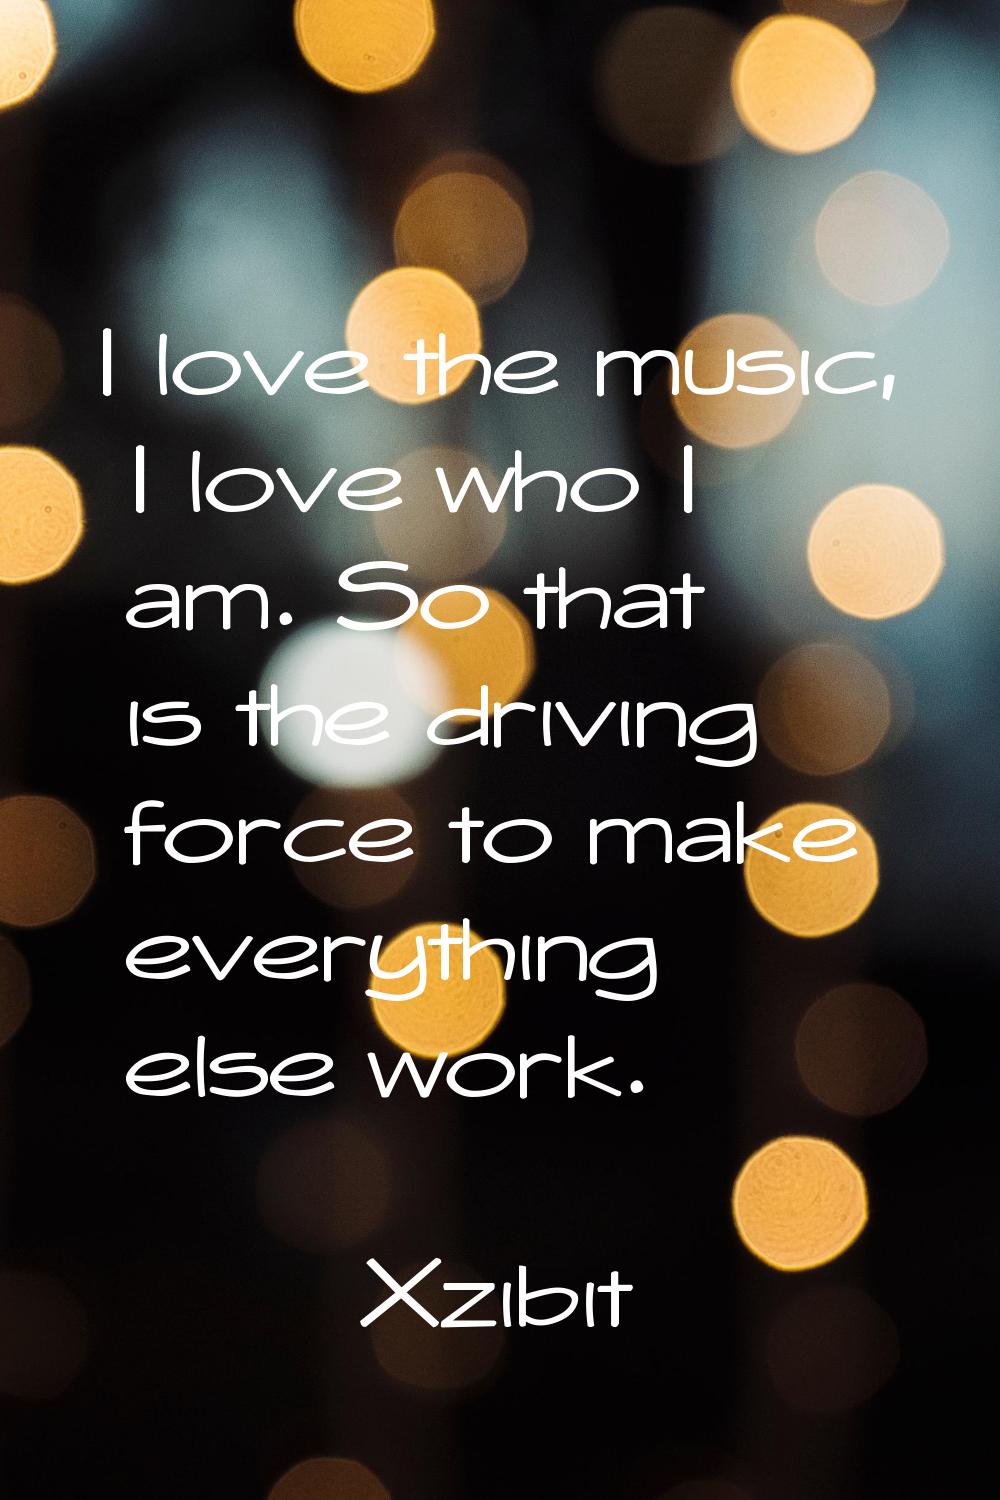 I love the music, I love who I am. So that is the driving force to make everything else work.